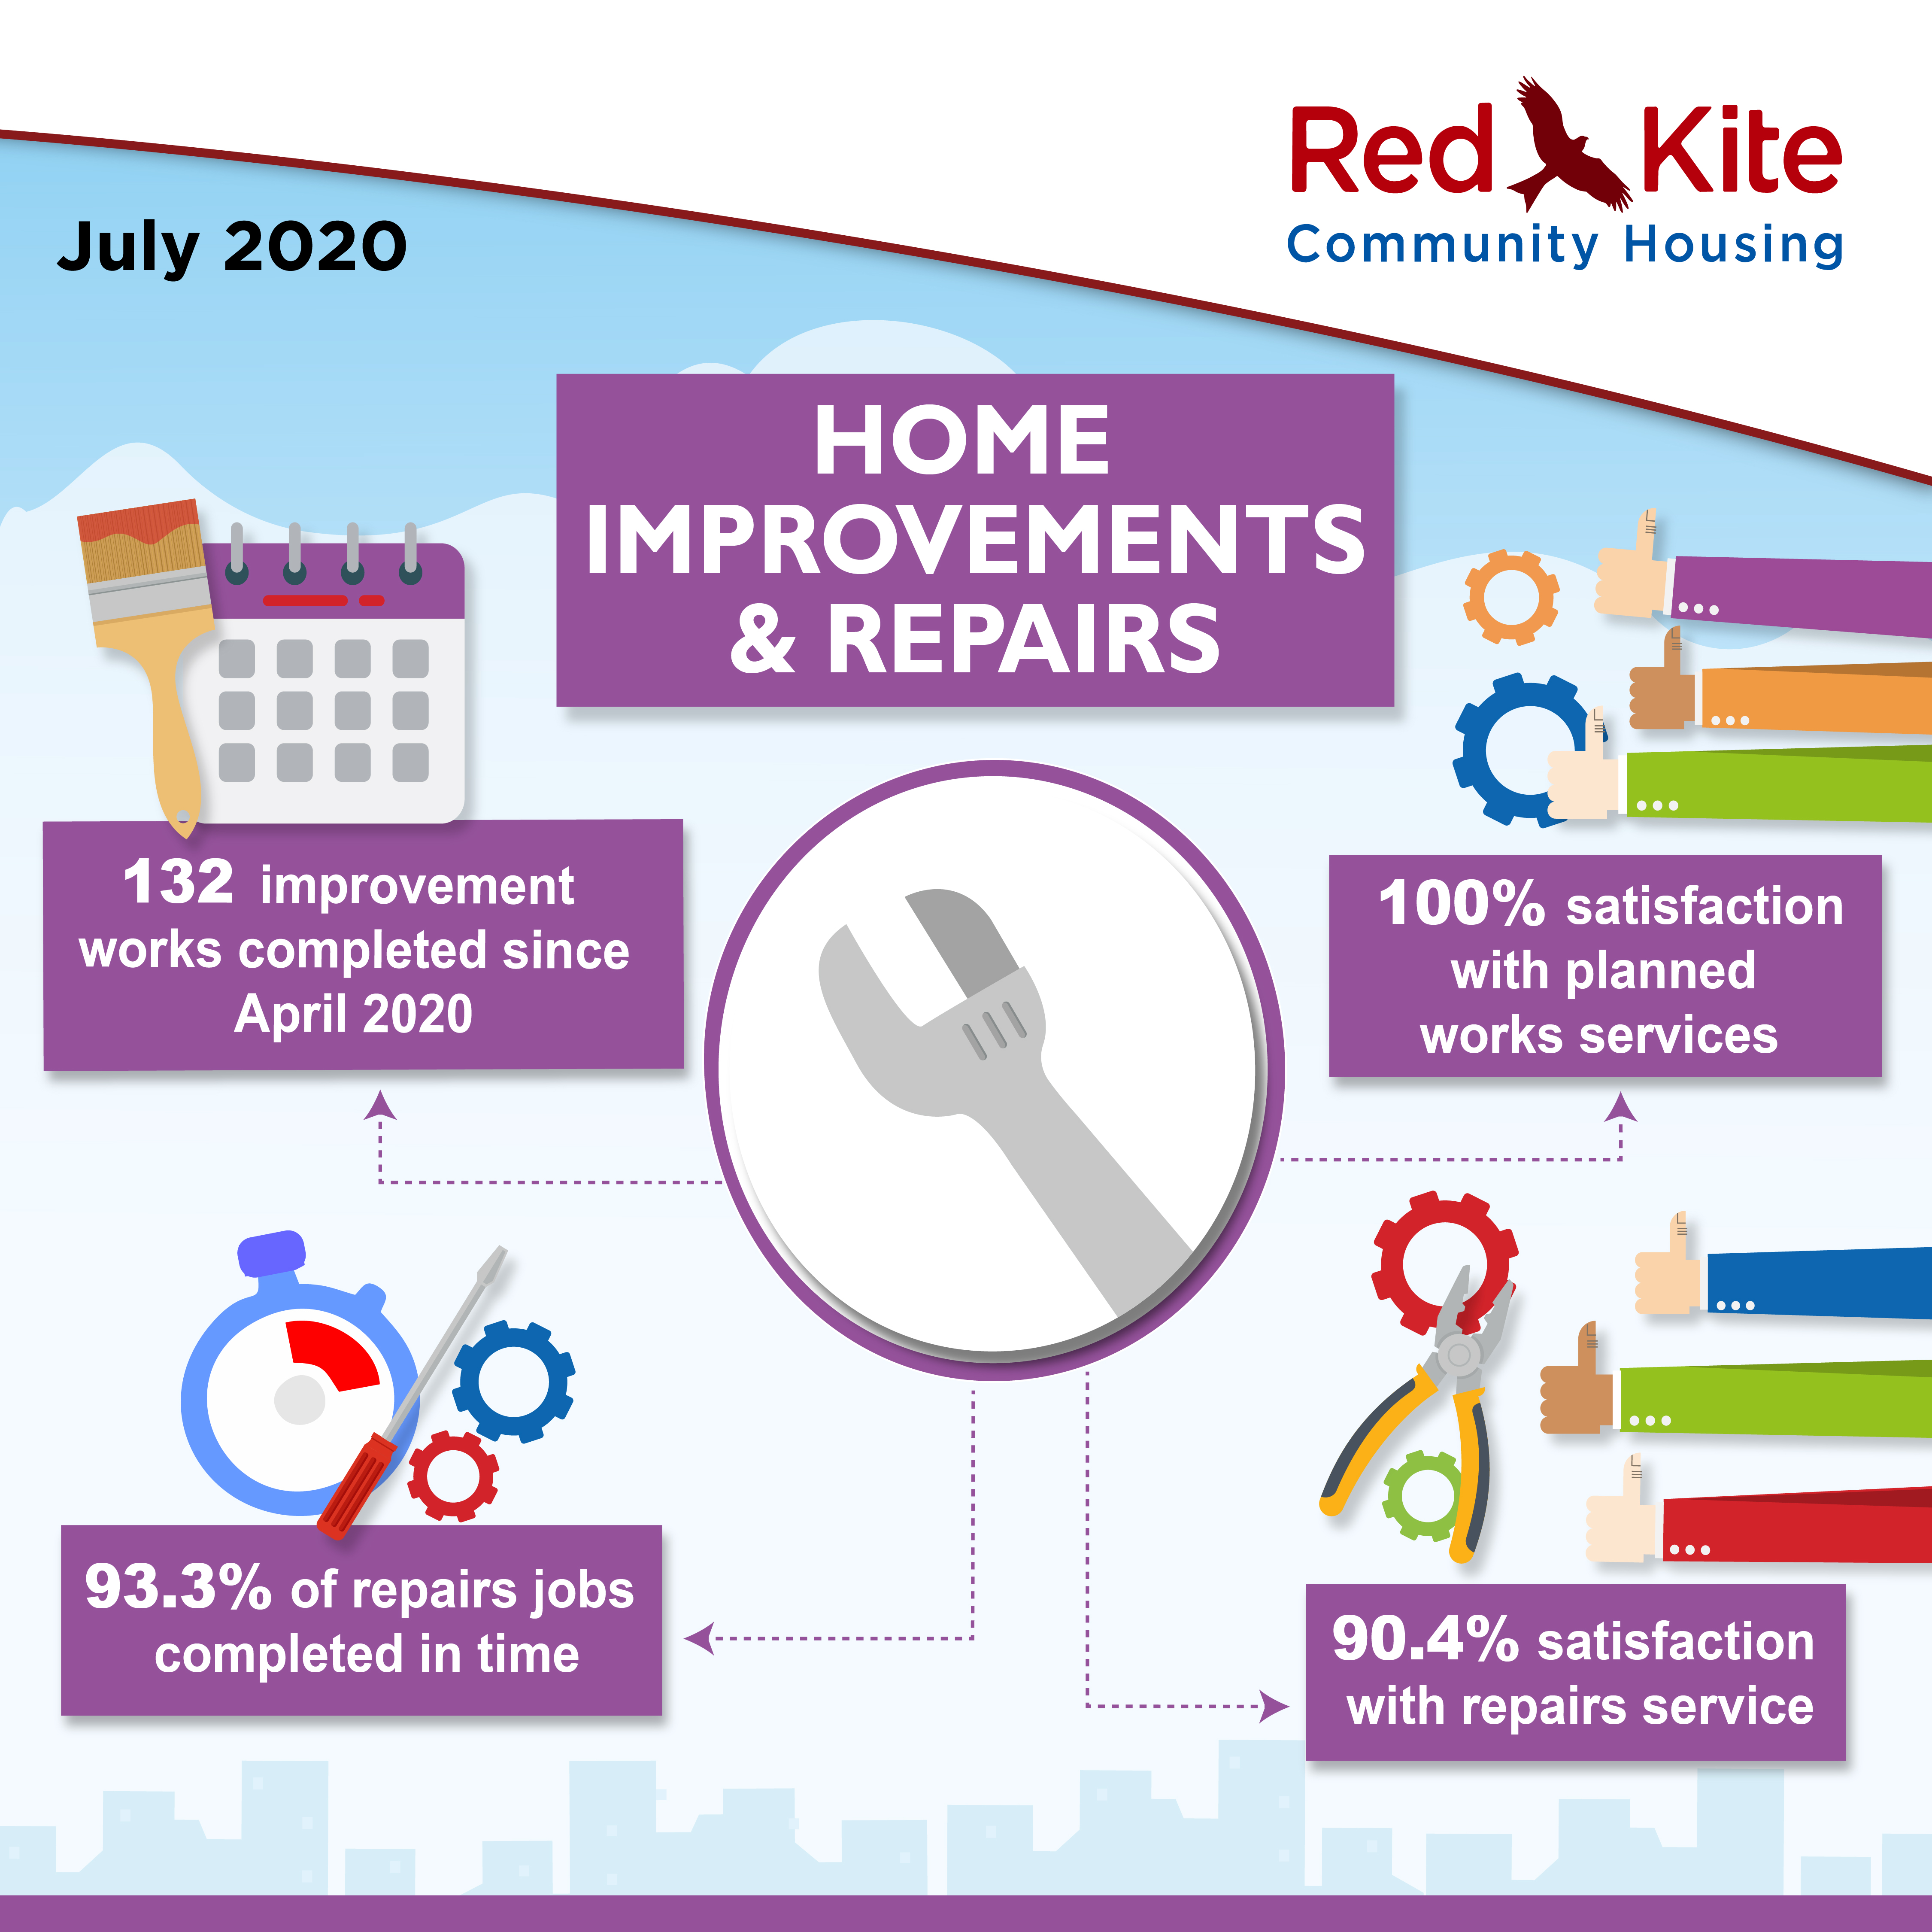 Home Improvements & Repairs Performance measures, July 2020 - 132 improvement works completed since the beginning of April 2020; 100% satisfaction with planned works services; 90.4% satisfaction with repairs service; 93.3% of repairs jobs completed in time